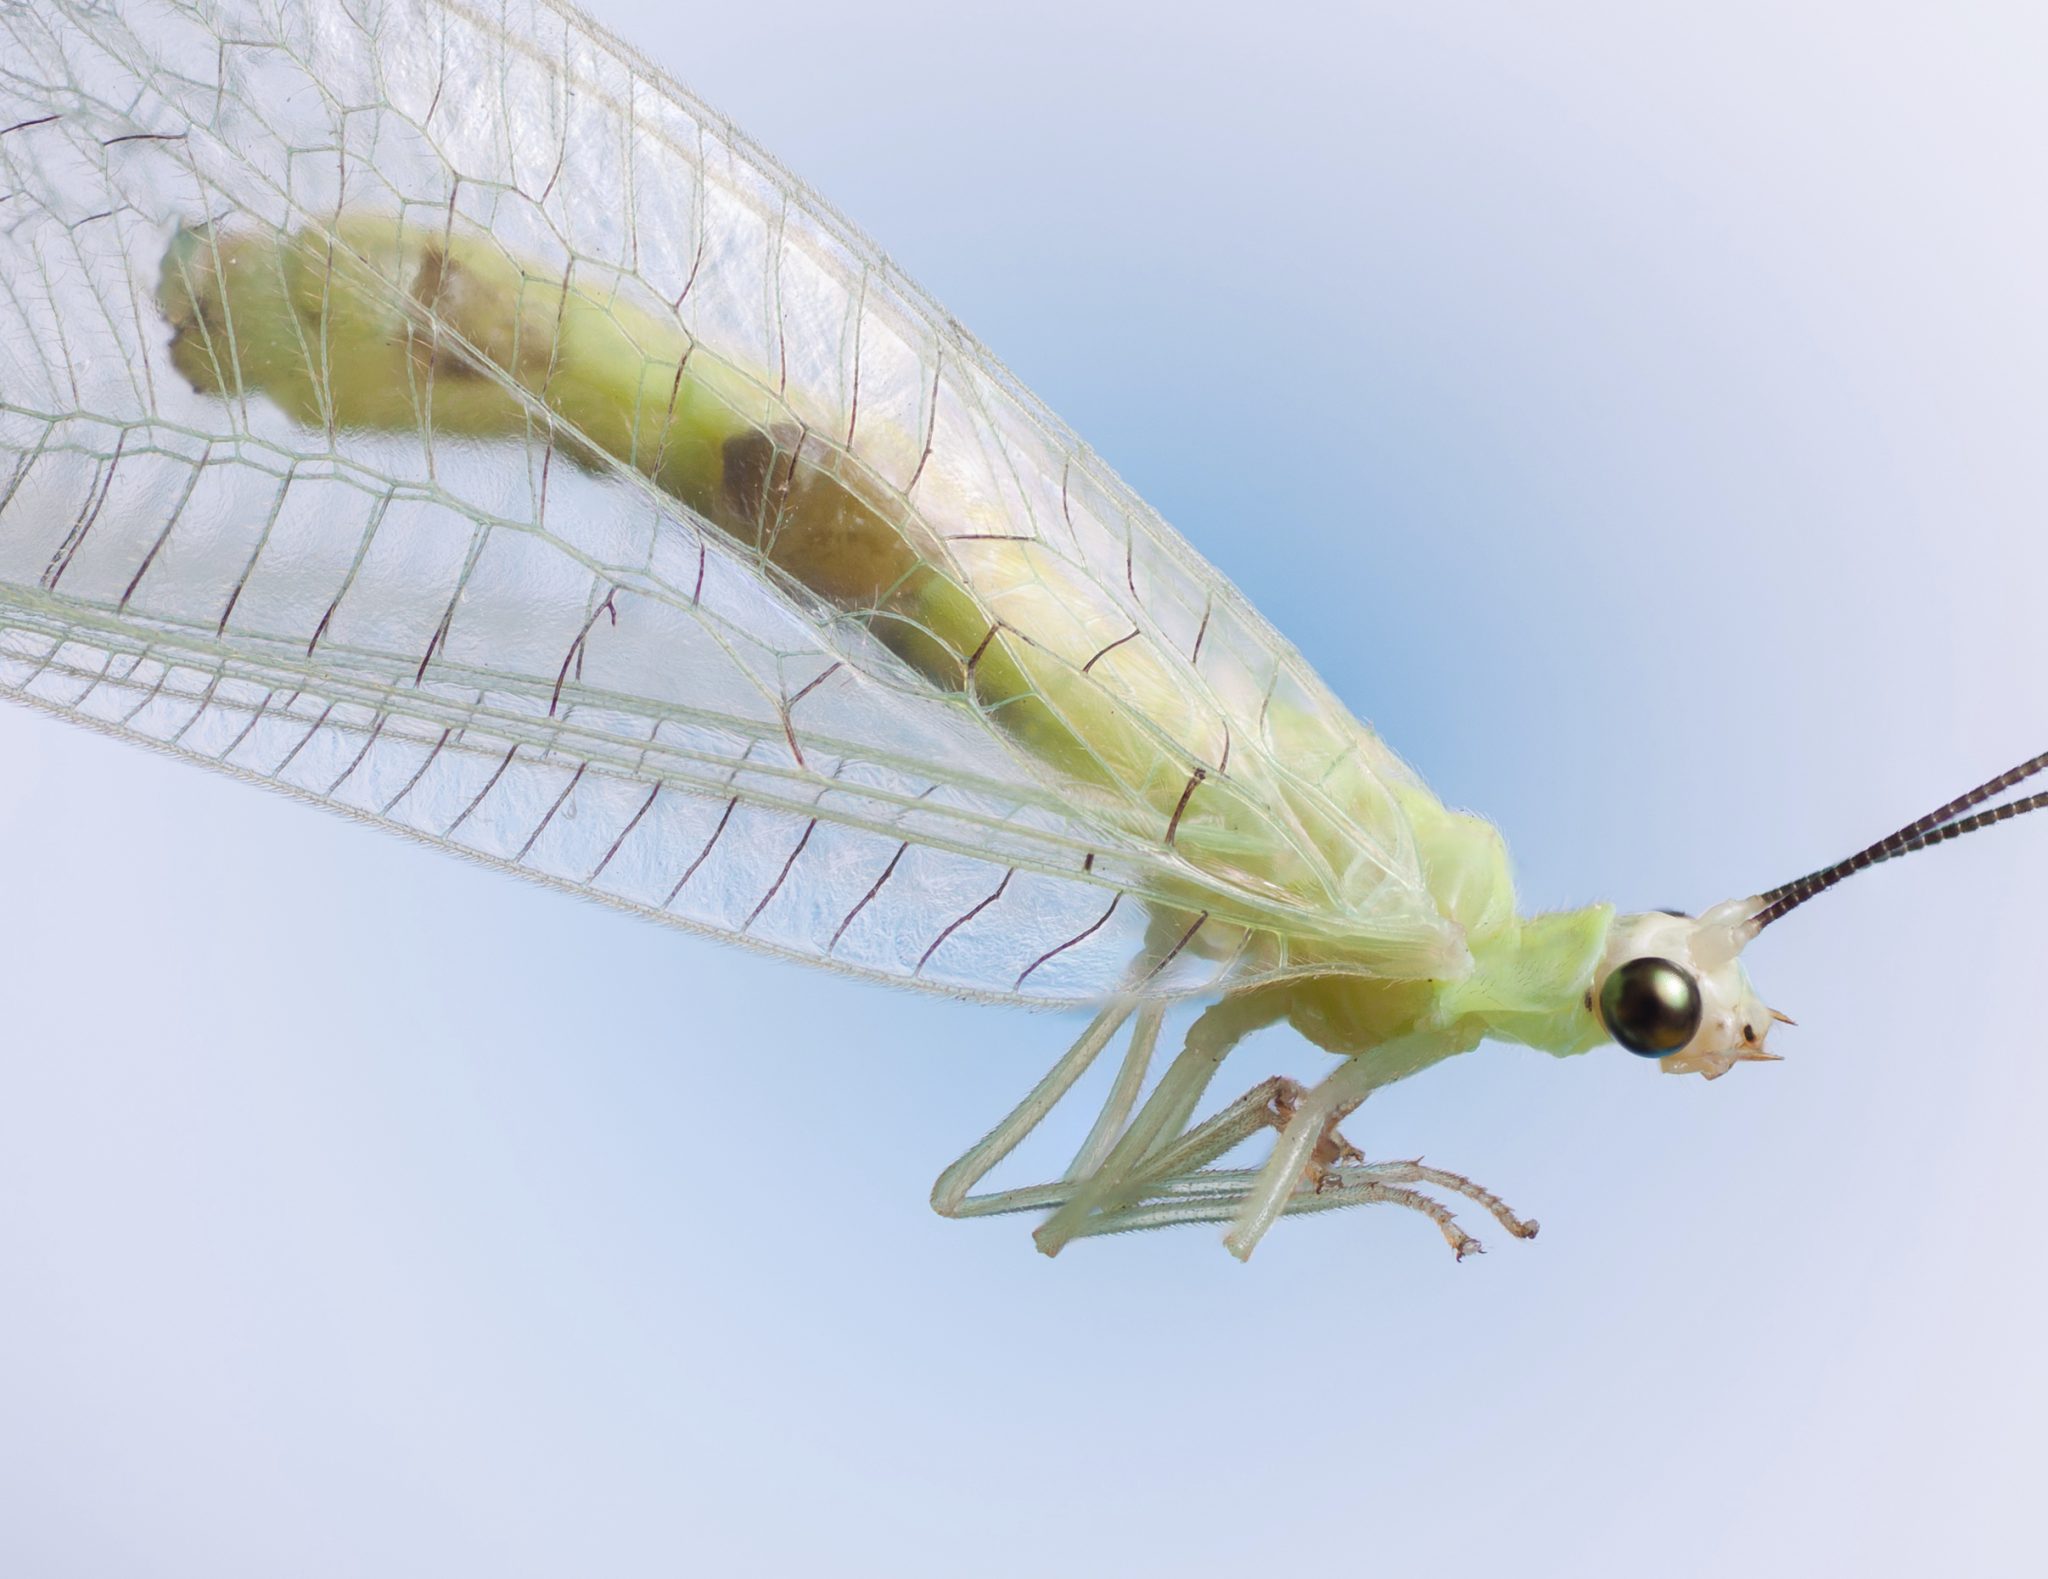 Top 10 Most Wanted Bugs in Your Garden – Green Lacewing - Alabama  Cooperative Extension System